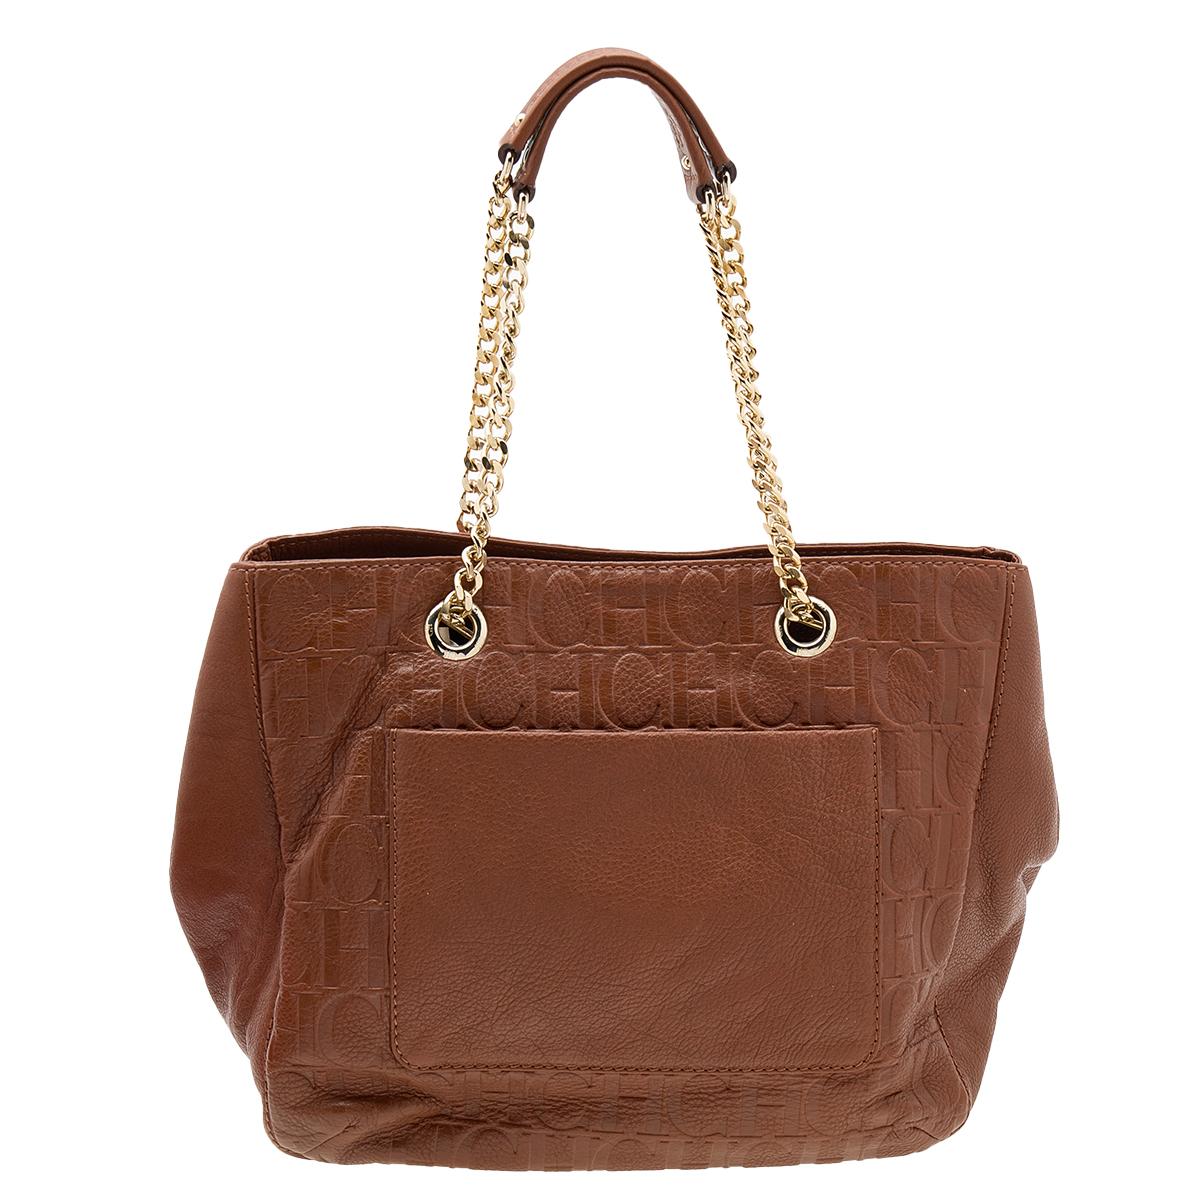 This Audrey tote from CH Carolina Herrera is a beloved creation. It is made using brown Monogram-embossed leather on the exterior. It is decorated with a large bow accent and distinct gold-toned hardware. This Audrey tote is held by sturdy chain